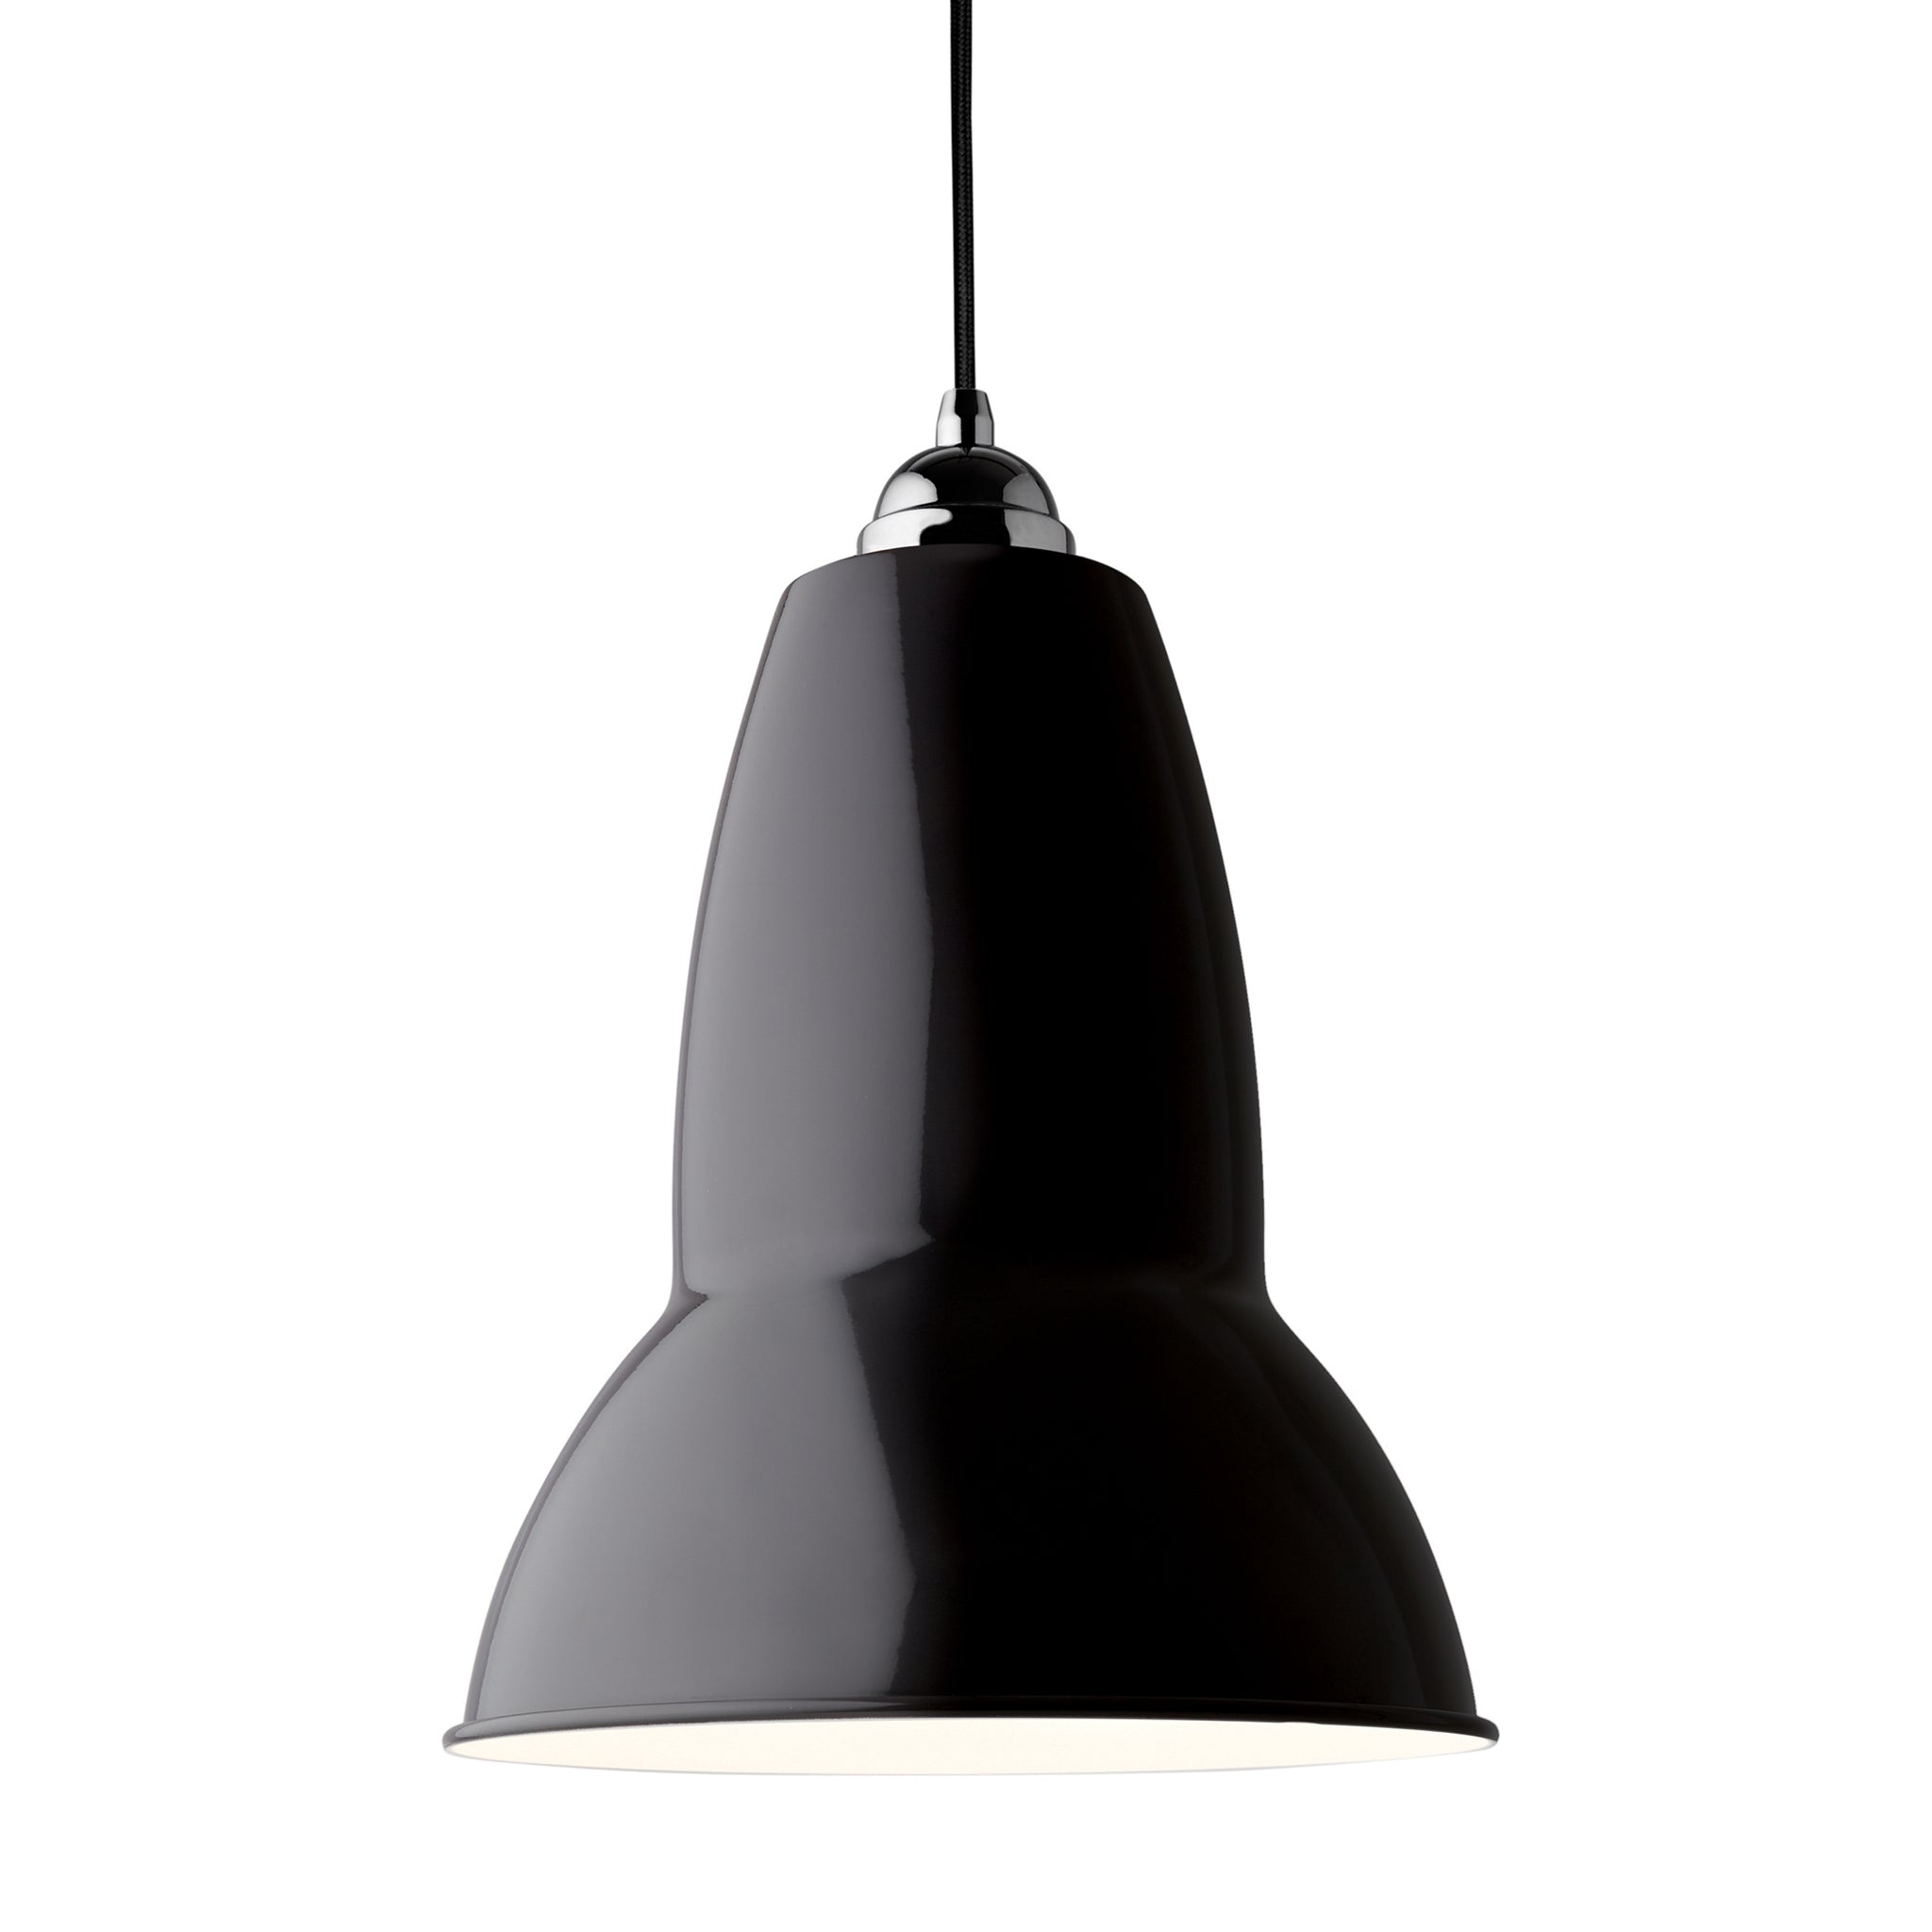 Original 1227 Maxi Pendant by Anglepoise